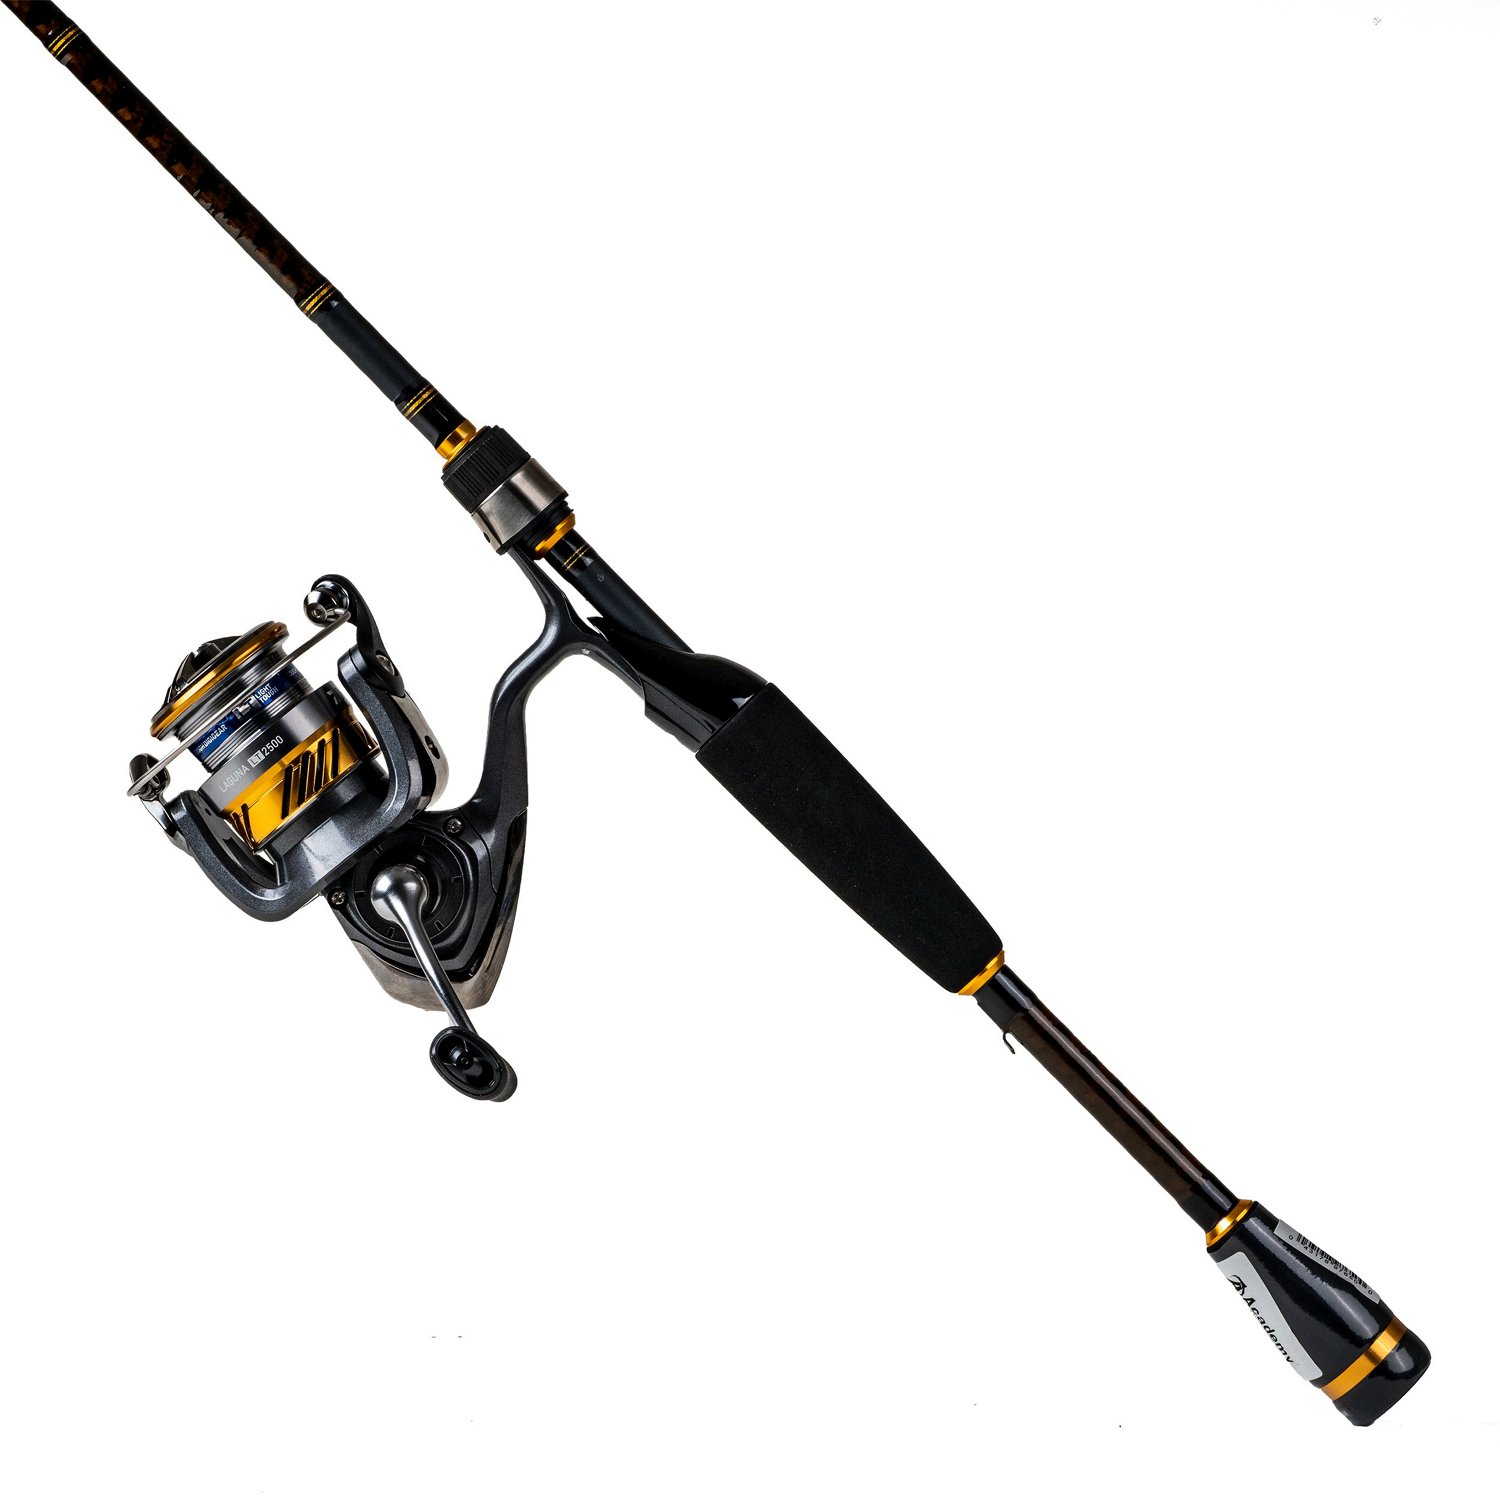 Spinning Rods Carbon Fiber Fishing Rod Or Rod Reel Combos Portable  Telescopic Fishing Pole 13BB Spinning Reel Fishing Set 230627 From Lian09,  $16.82